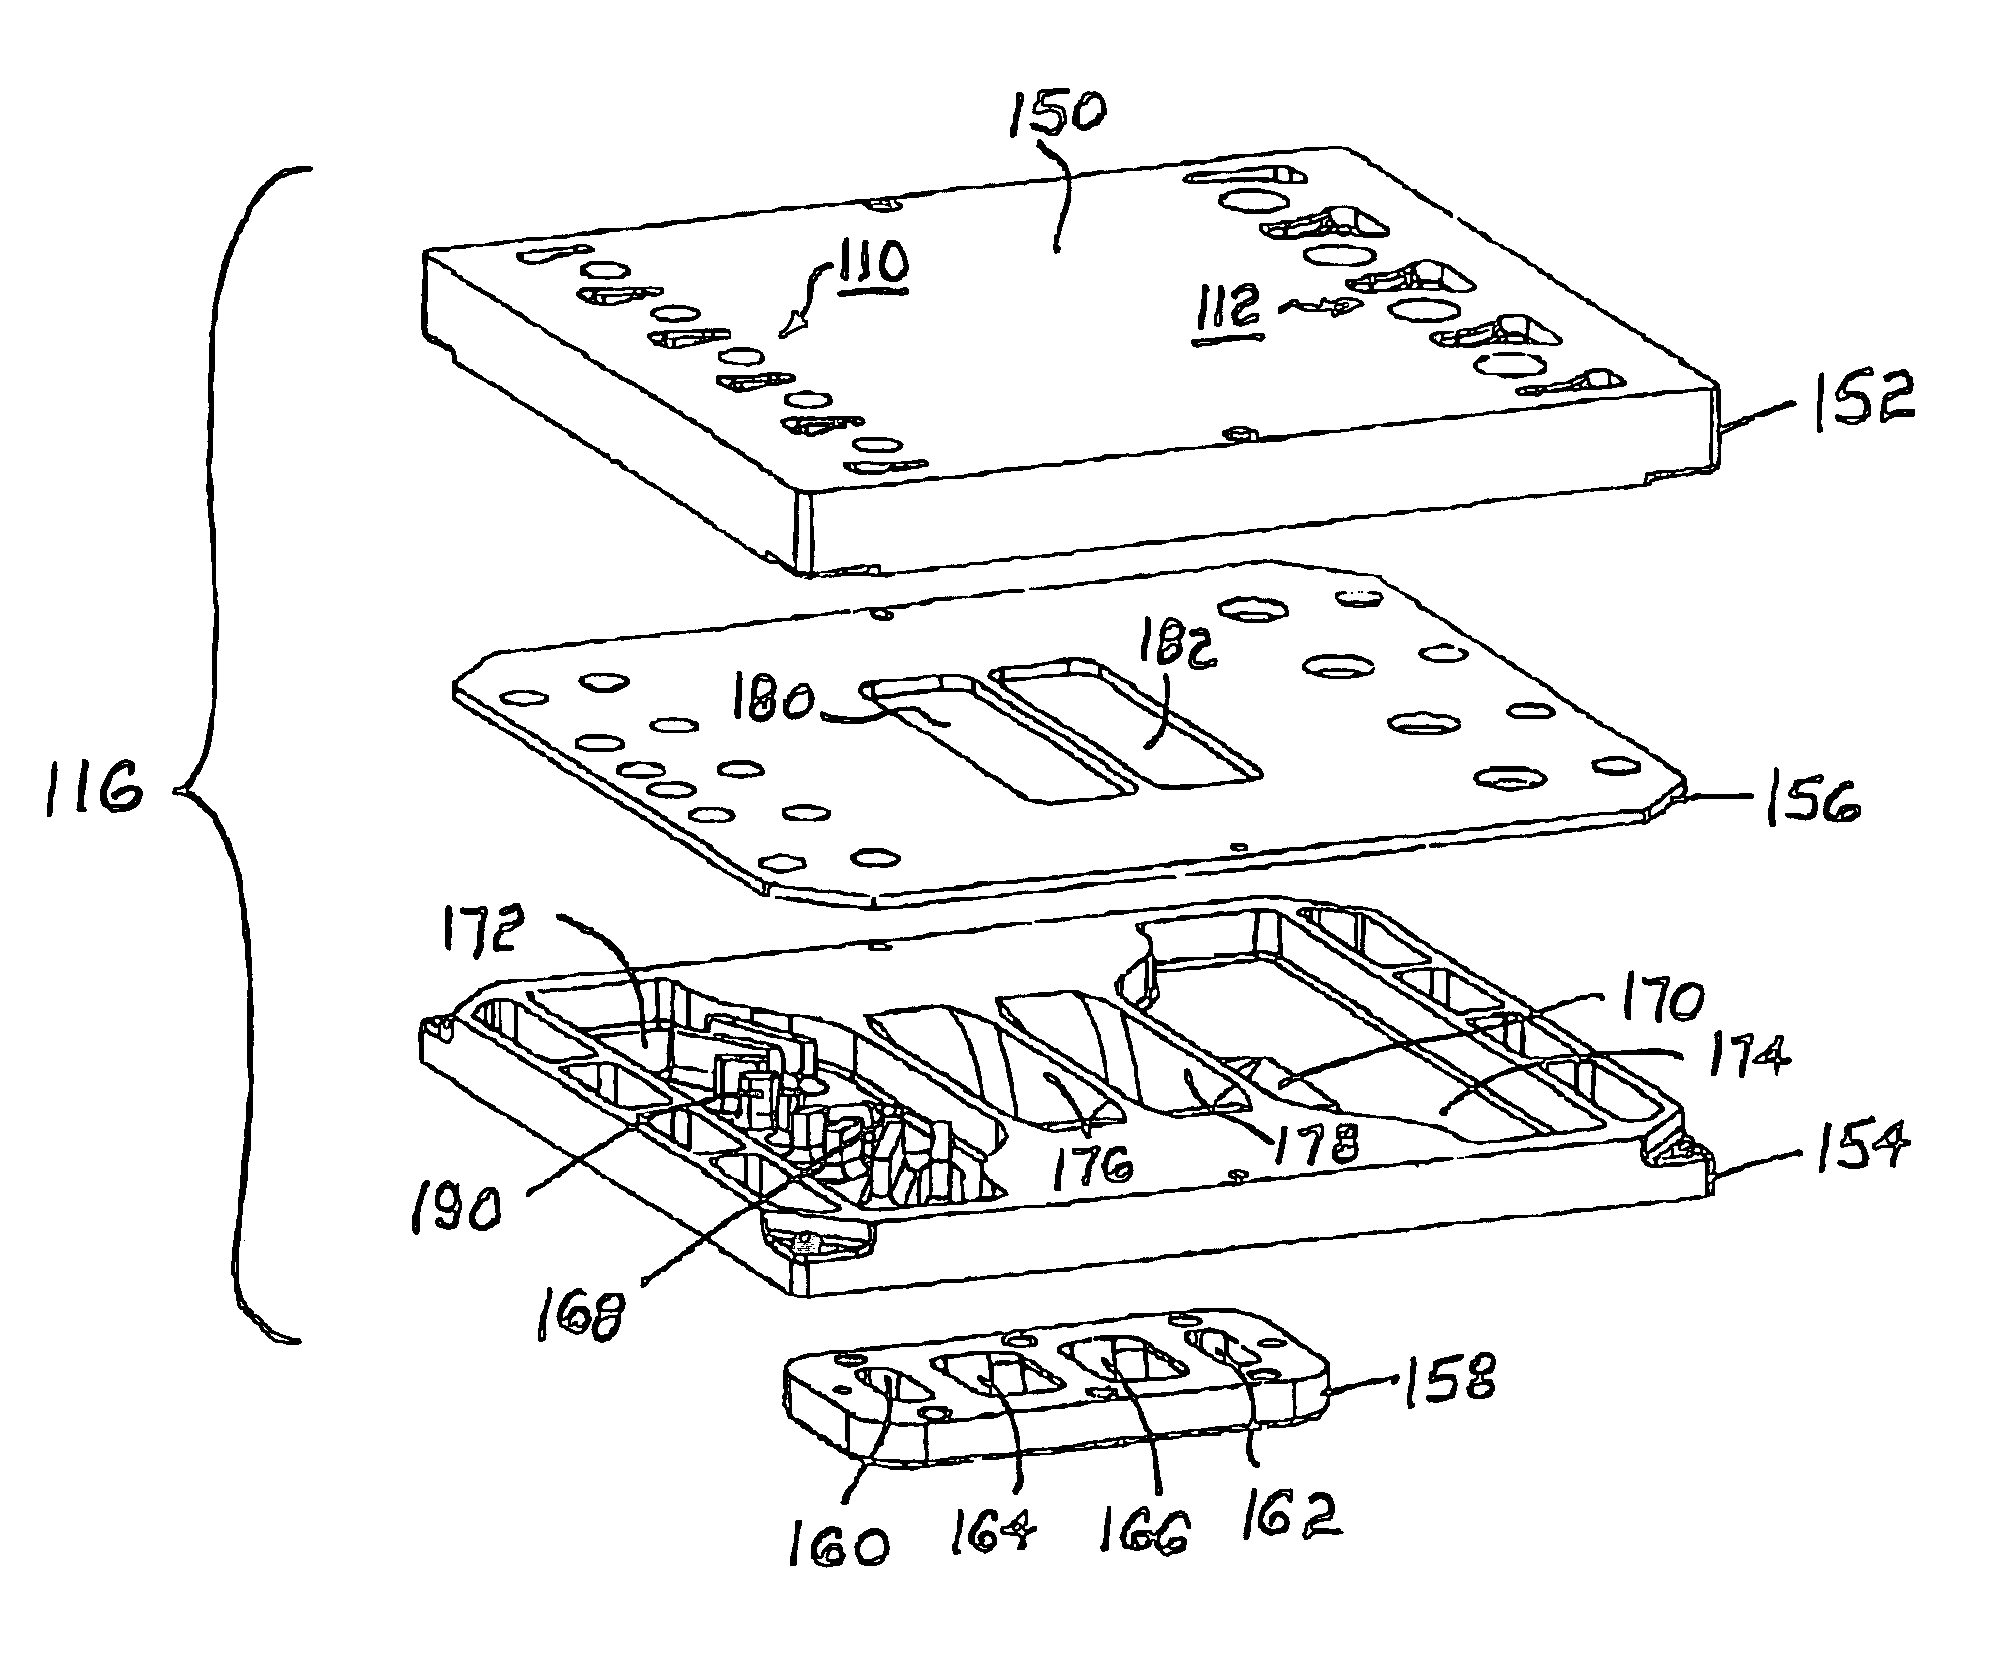 Solid oxide fuel cell stack having an integral gas distribution manifold